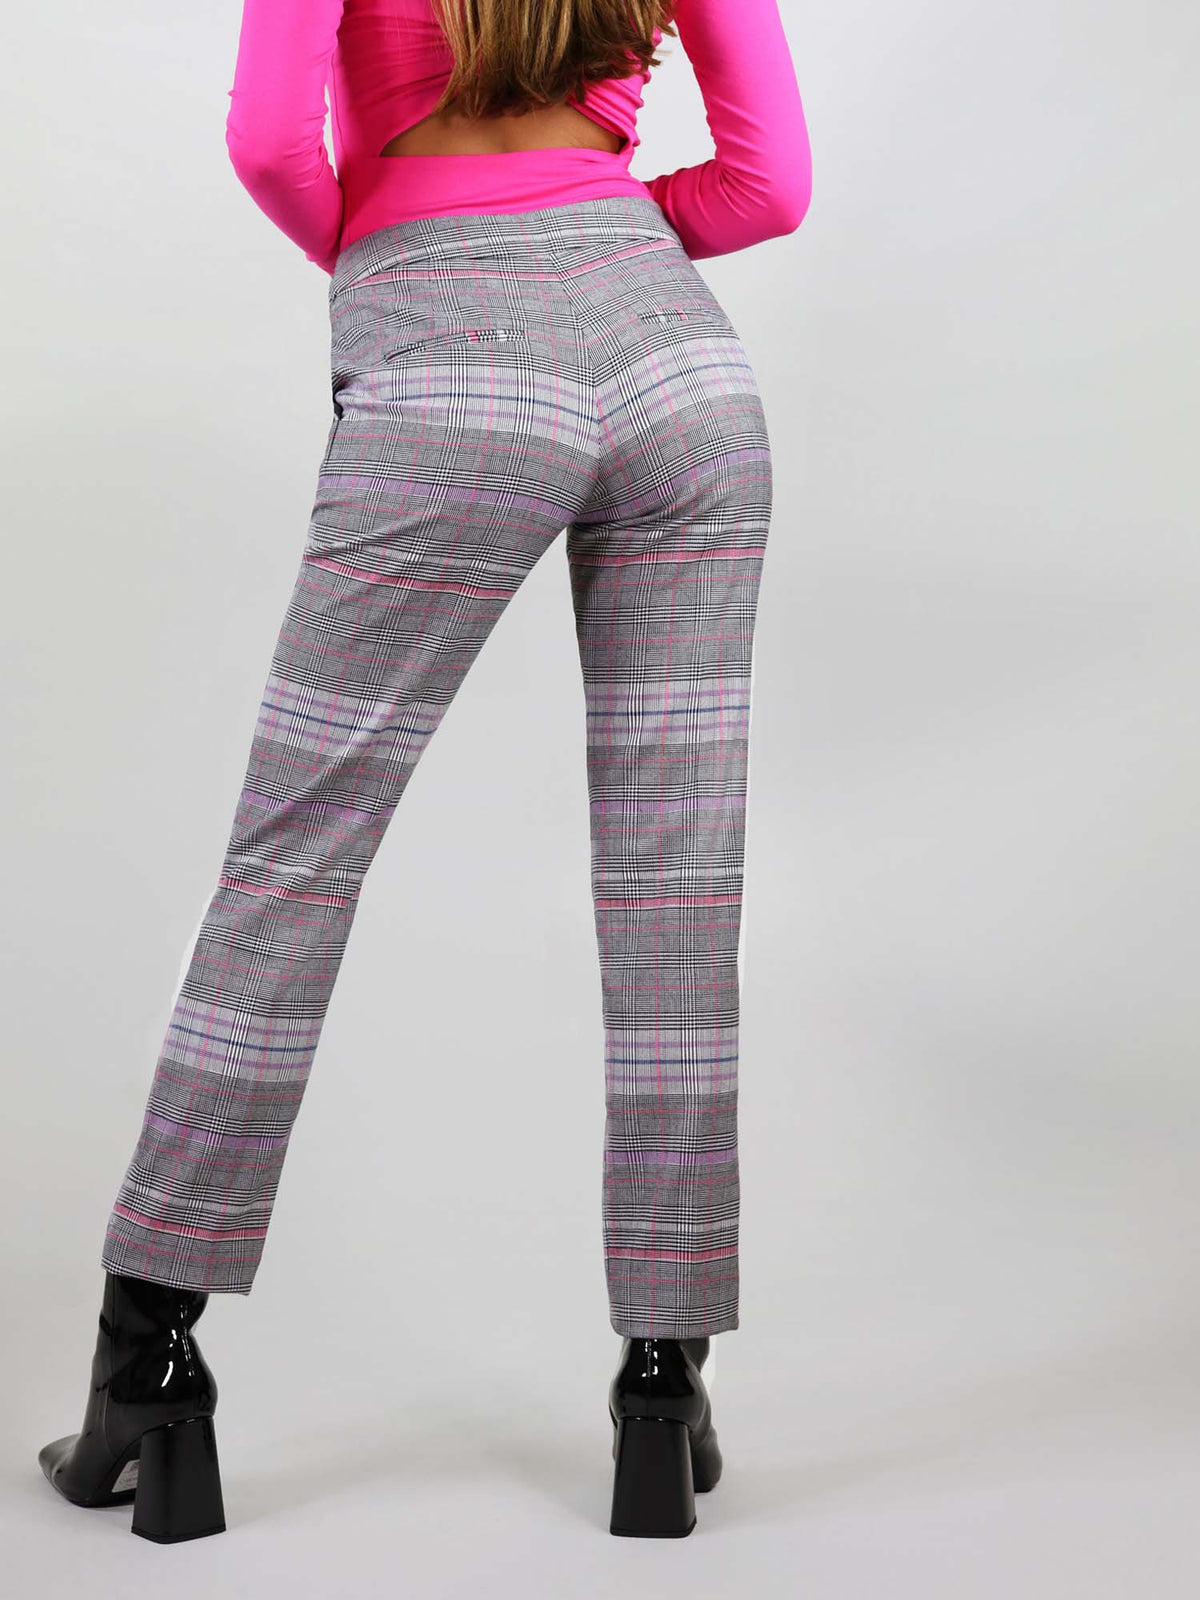 Back view of the revivify trousers in pink a grey checker fabric. It has bright pink details and slim fit, comfortable wear.